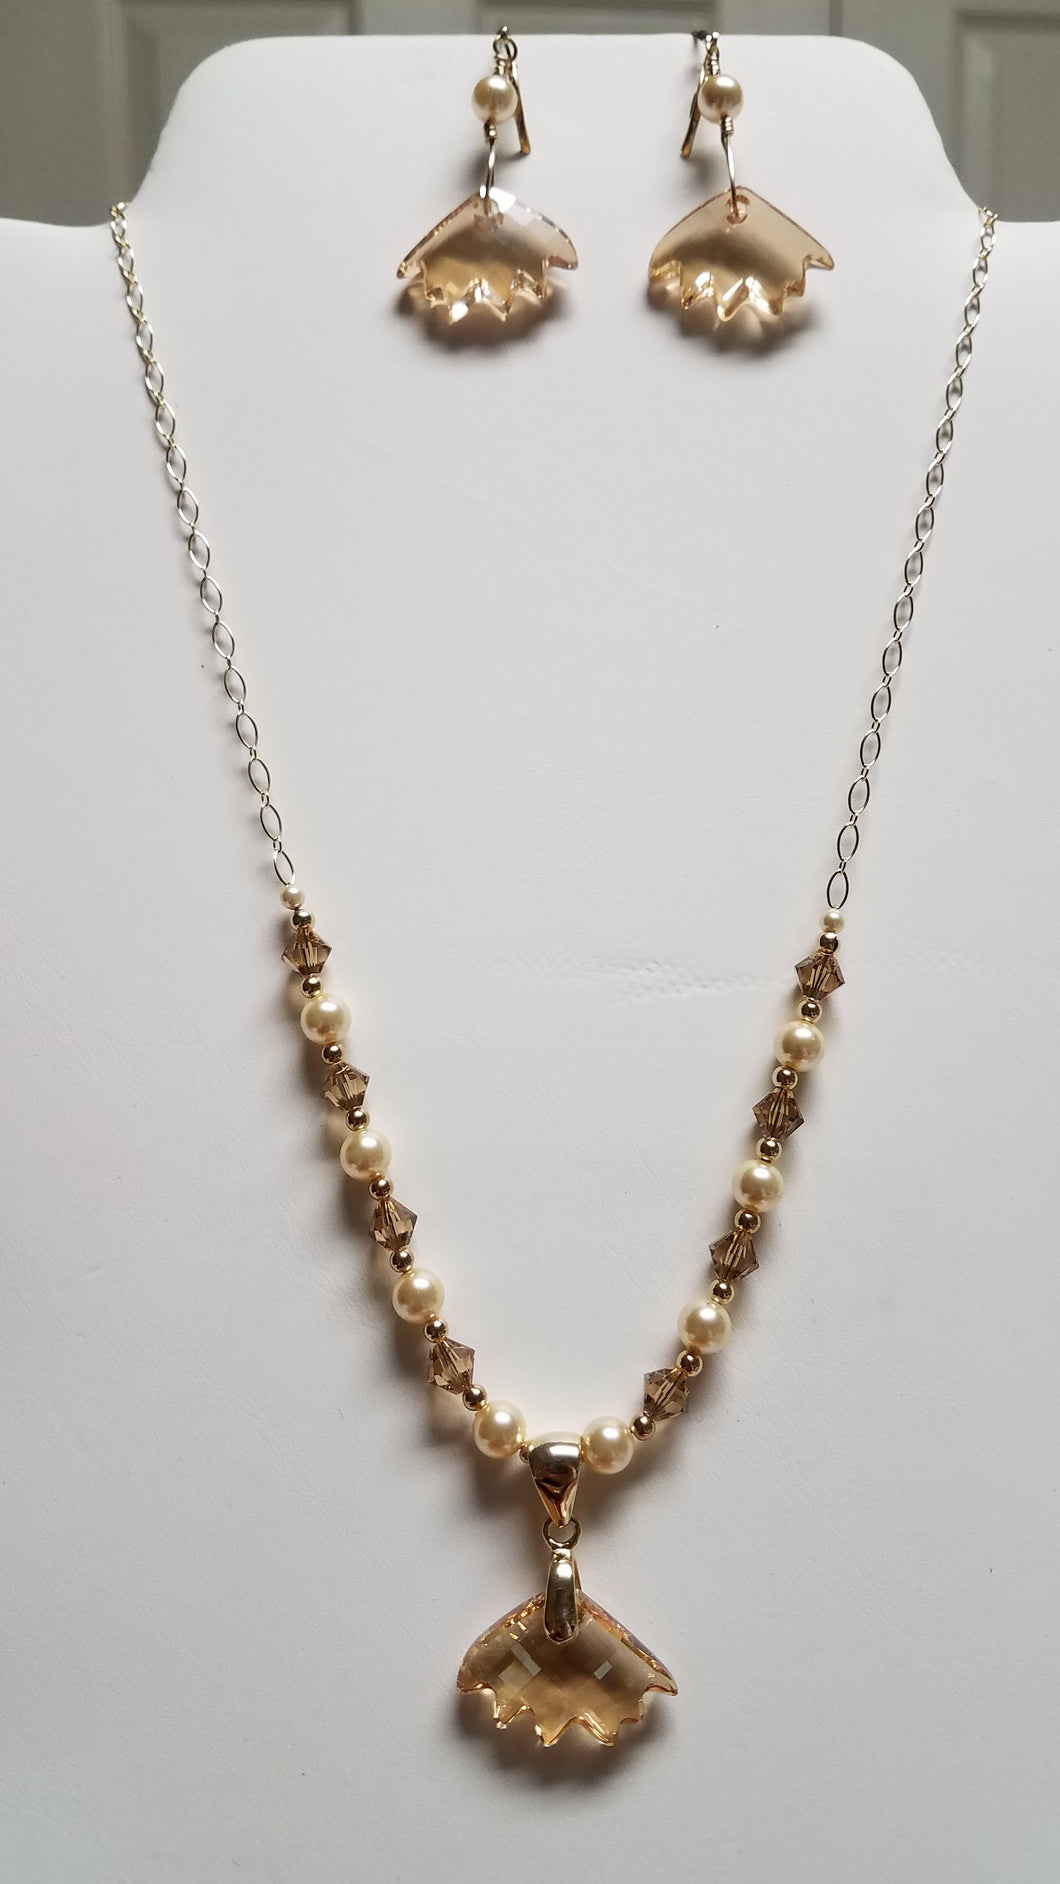 crystal-golden-shadow-Zinnia-Necklace-Leverback-Earrings-gold-fill